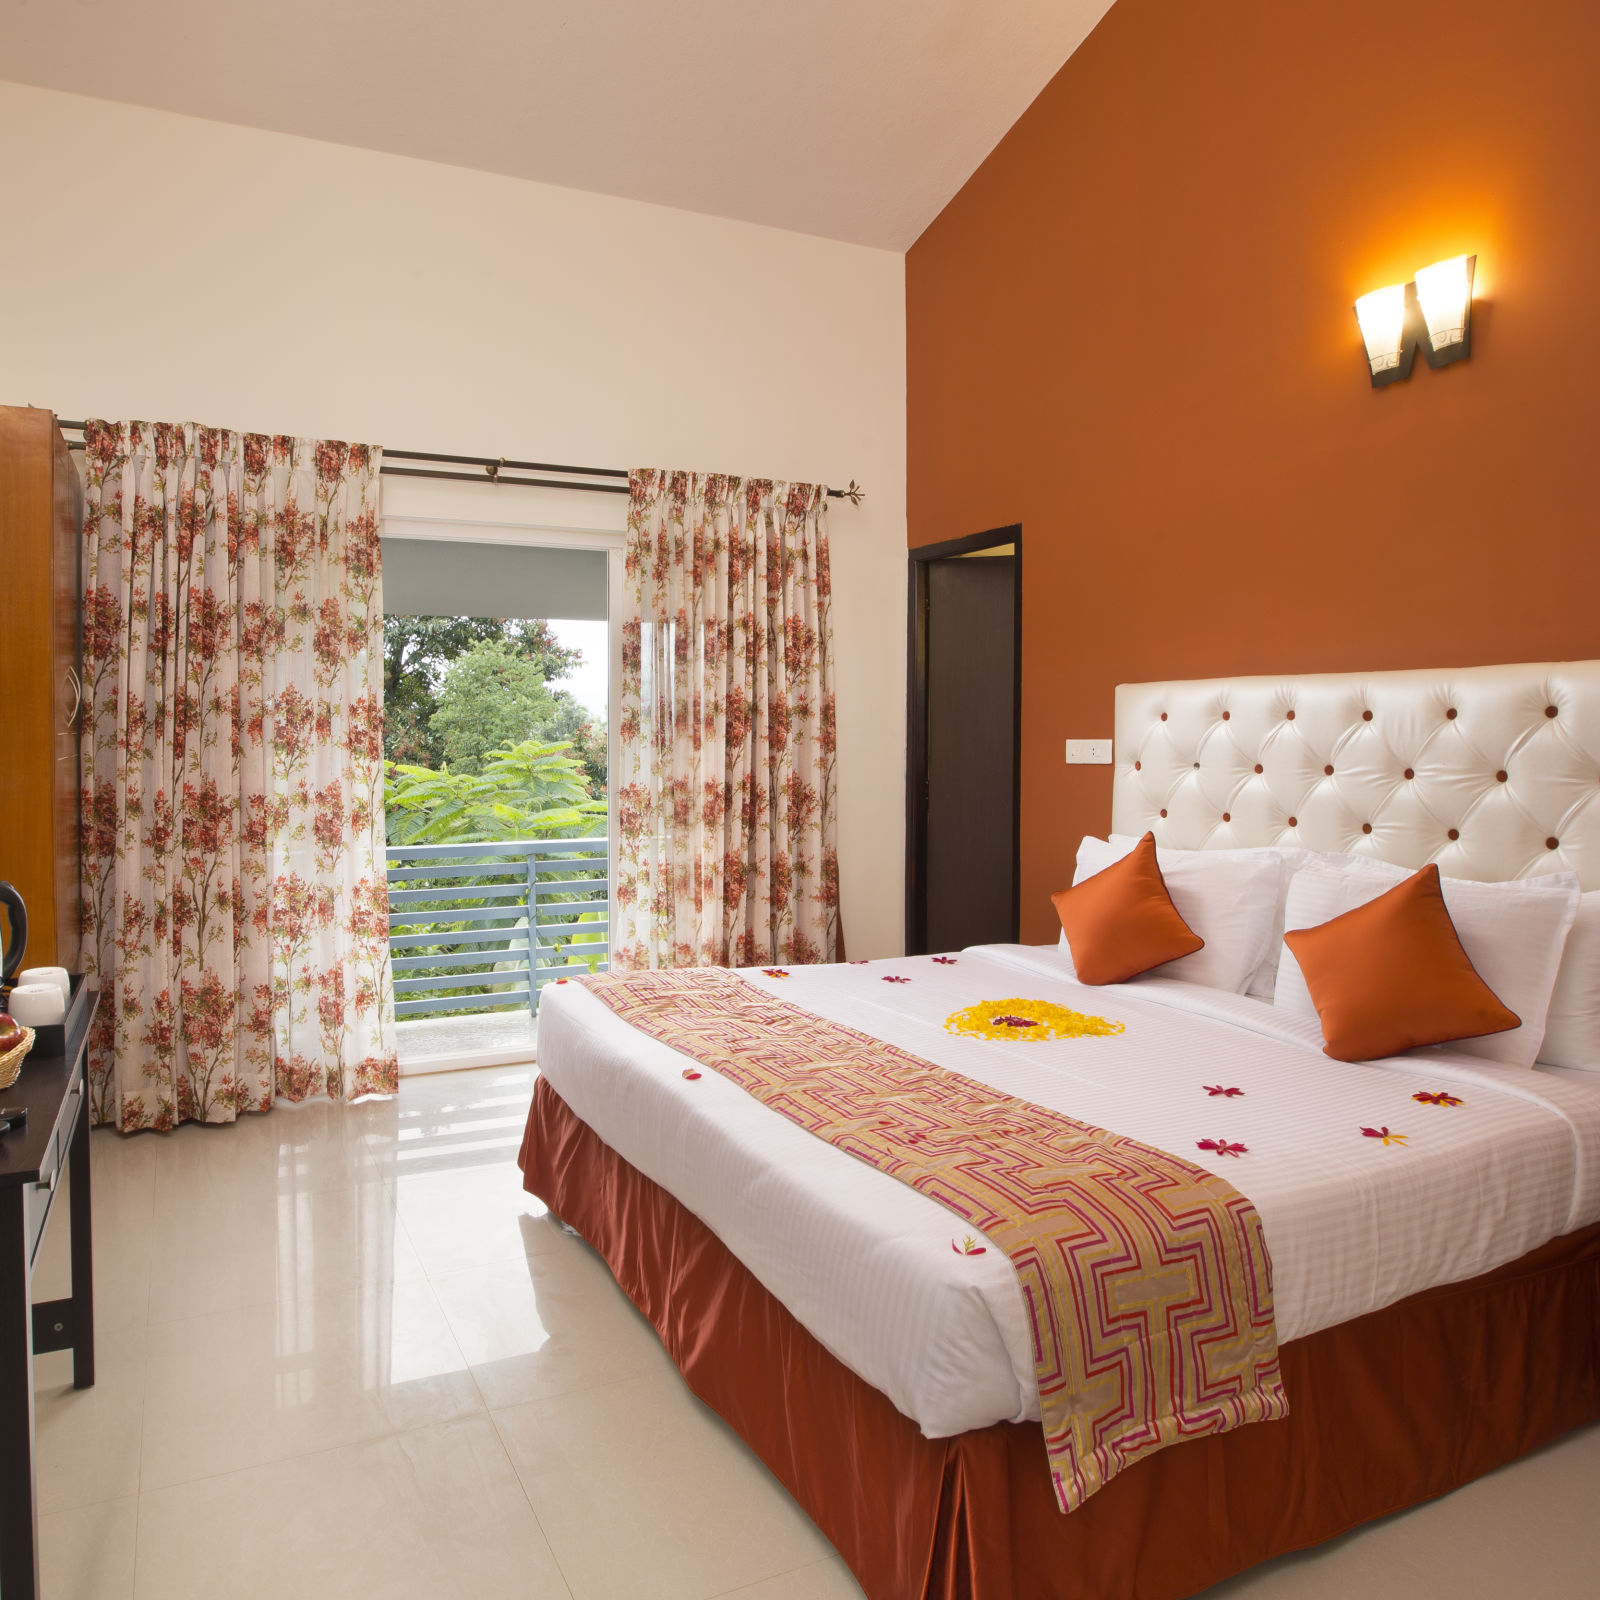 A bright and inviting hotel room with a white tufted headboard, orange accents and floral curtains with a view  - Kairos, Yelagiri